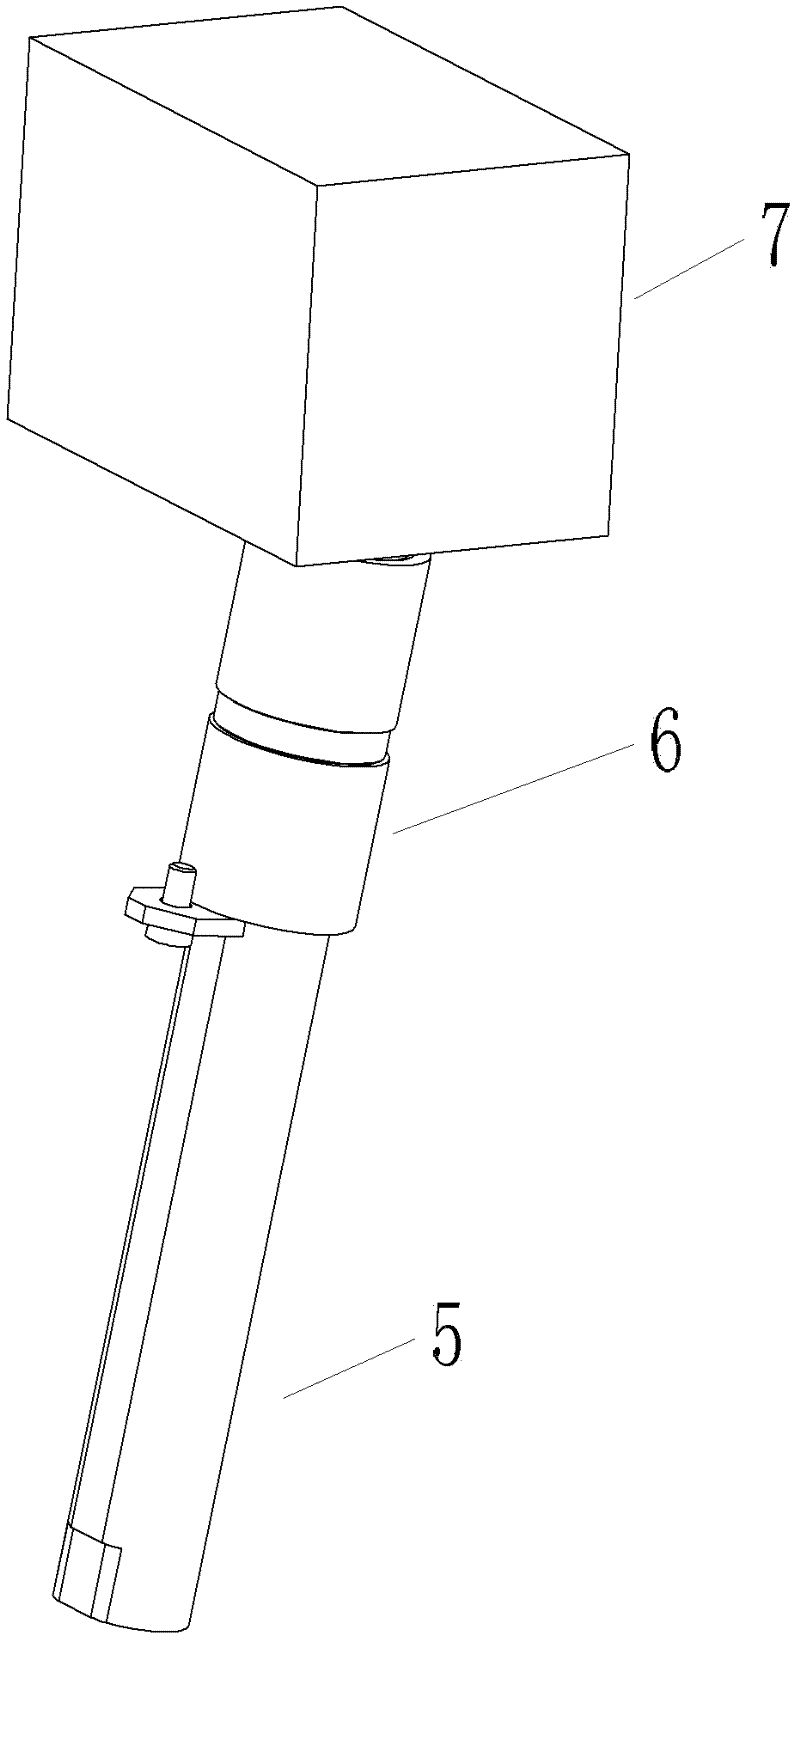 Down-slope oblique jacking accelerating core pulling mechanism assembly in injection mold